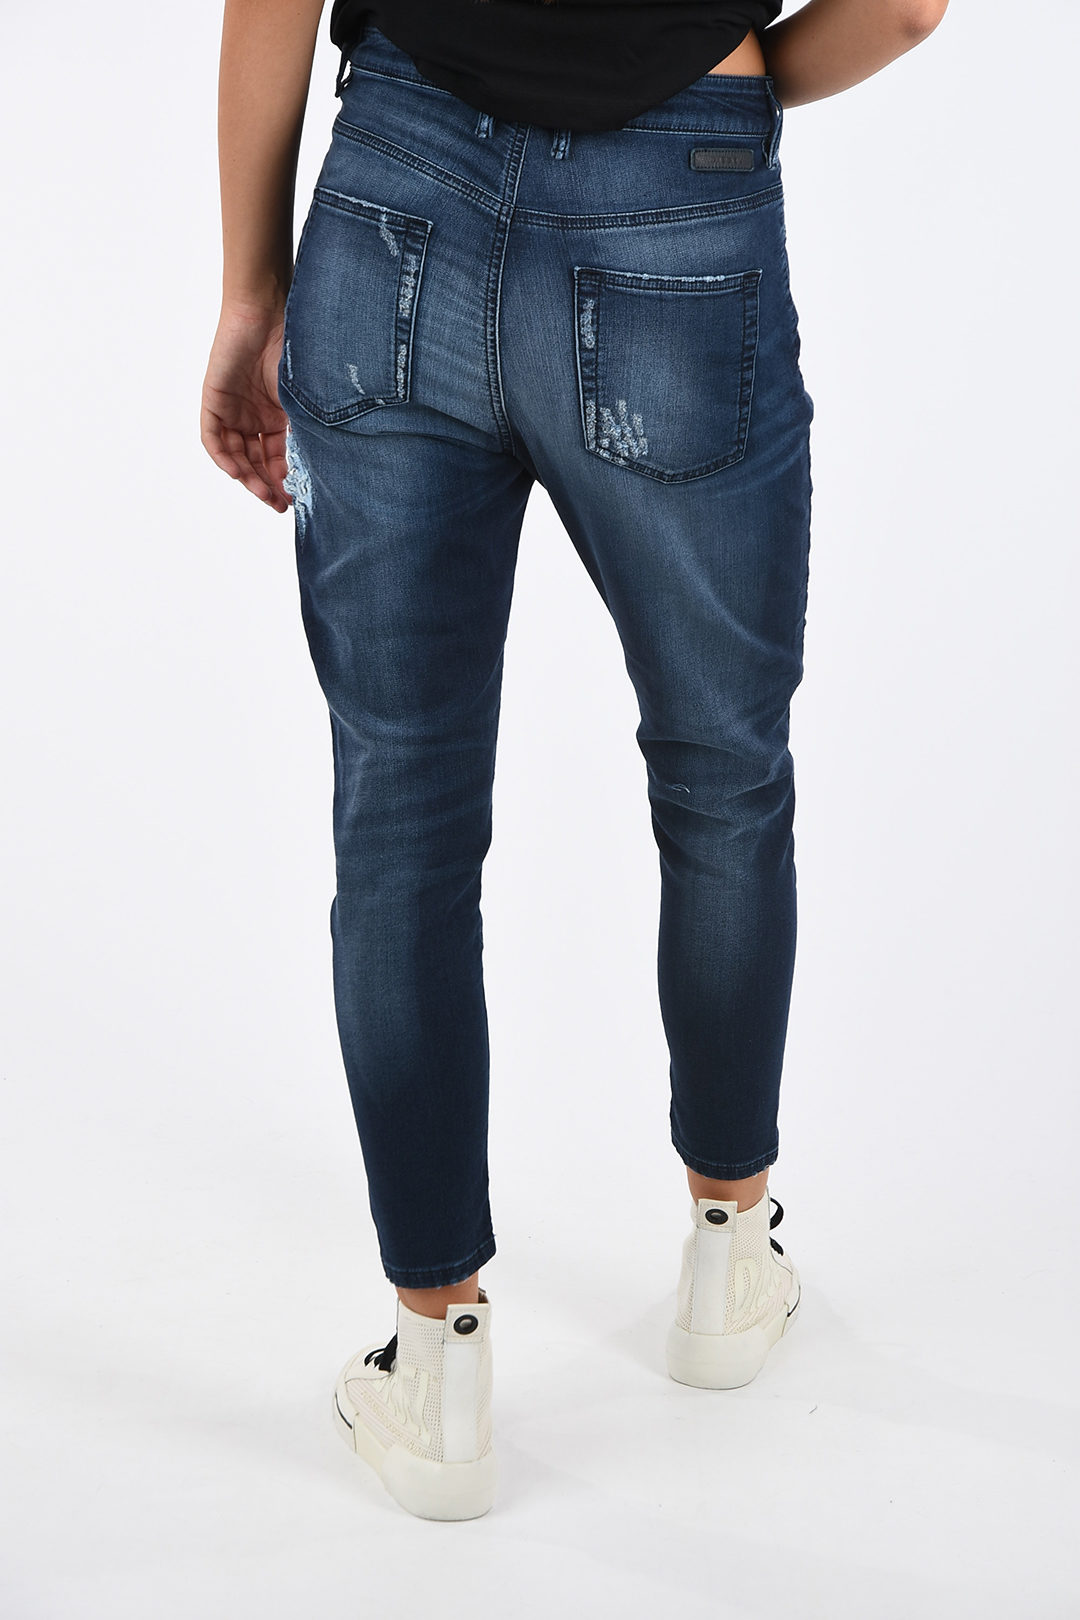 Faculteit oase klein Diesel Distressed CANDYS-NE Jogg Jeans women - Glamood Outlet